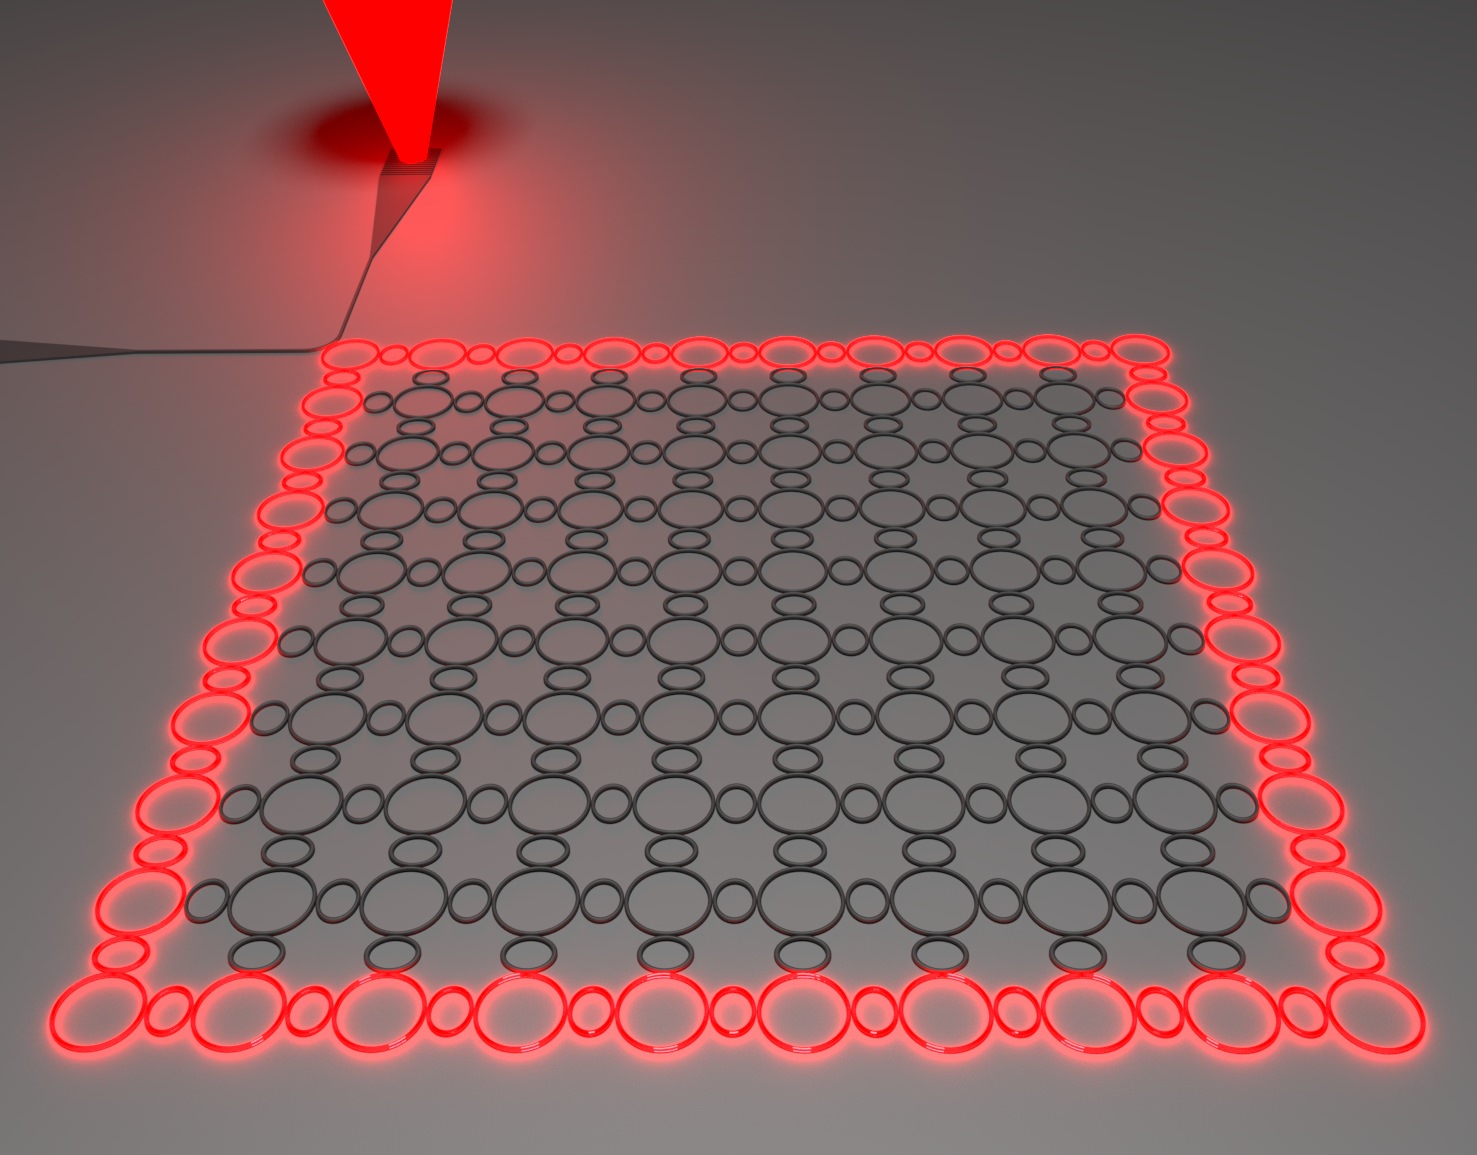 Illustration of the topological insulator laser: the light goes around the perimeter unobstructed by sharp corner or disorder, and eventually exits through the output port.